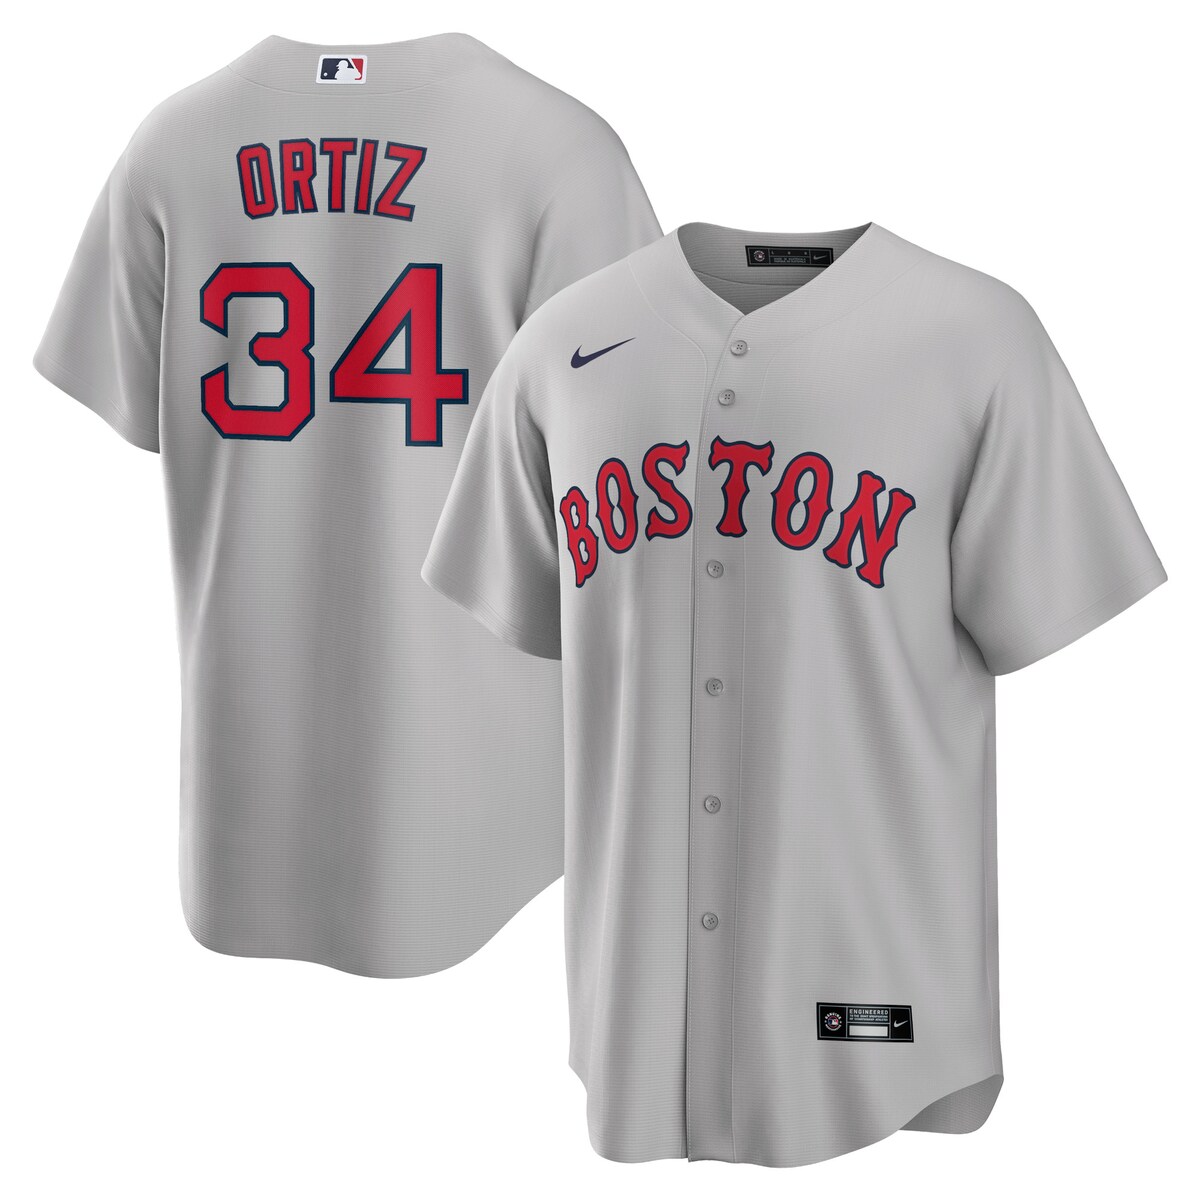 When your Boston Red Sox finally hit the field, show your support all game long with the help of a legend with this David Ortiz Replica Player jersey from Nike. Its classic full-button design features bold player and Boston Red Sox applique graphics, leaving no doubt you and Big Papi will be along for the ride for all 162 games and beyond this season.ImportedFull-button frontReplica JerseyOfficially licensedMachine wash, tumble dry lowBrand: NikeHeat-sealed jock tagHeat-sealed transfer appliqueMLB Batterman applique on center back neckRounded droptail hemShort sleeveMaterial: 100% PolyesterJersey Color Style: Road